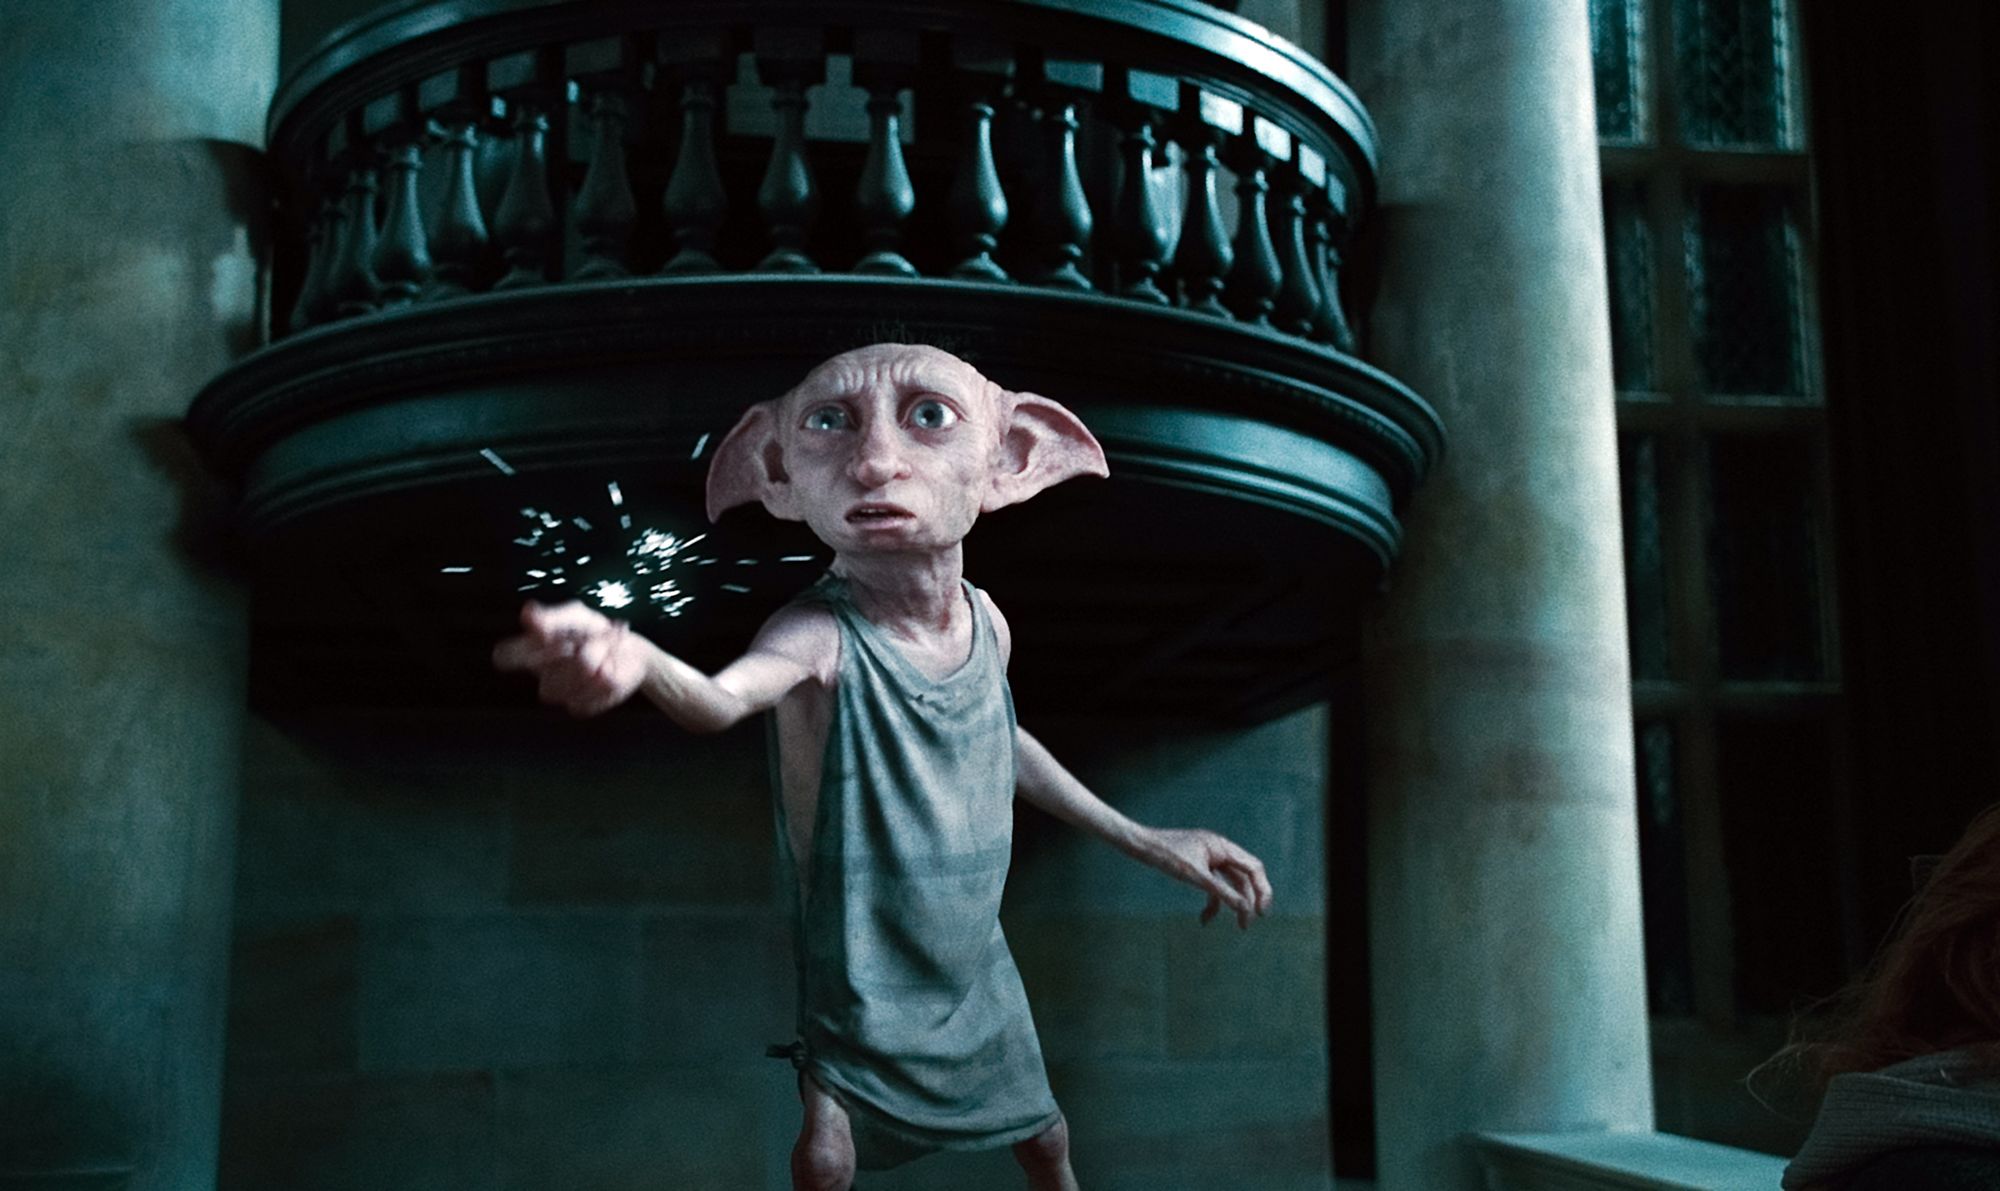 Welsh officials say Dobby's the elf's grave can stay